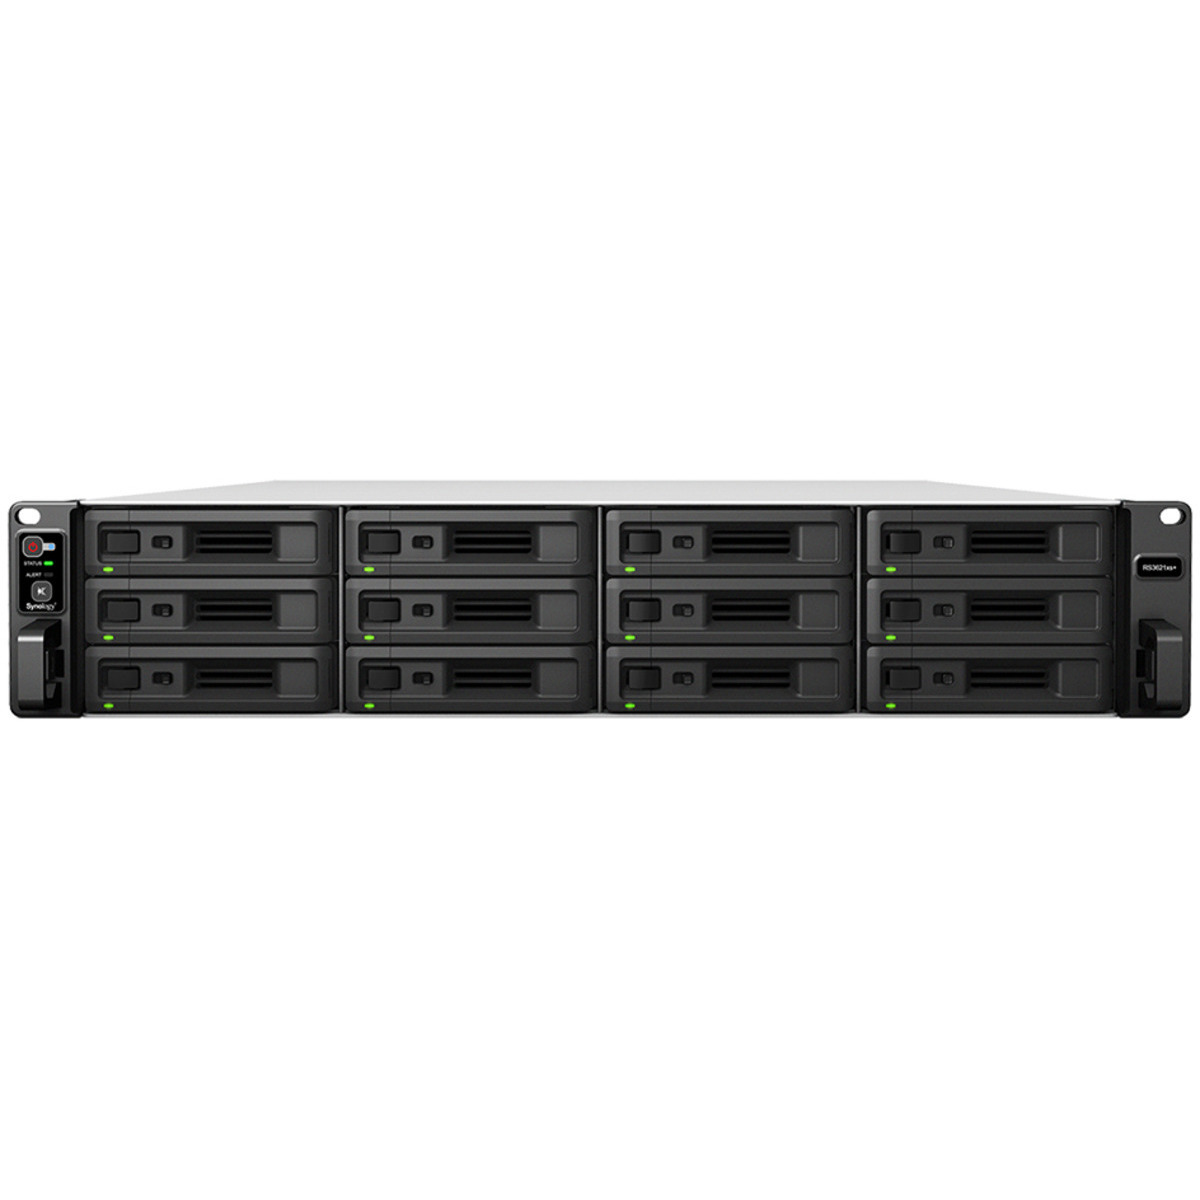 Synology RackStation RS3621xs+ 132tb 12-Bay RackMount Large Business / Enterprise NAS - Network Attached Storage Device 11x12tb Western Digital Red Pro WD121KFBX 3.5 7200rpm SATA 6Gb/s HDD NAS Class Drives Installed - Burn-In Tested RackStation RS3621xs+